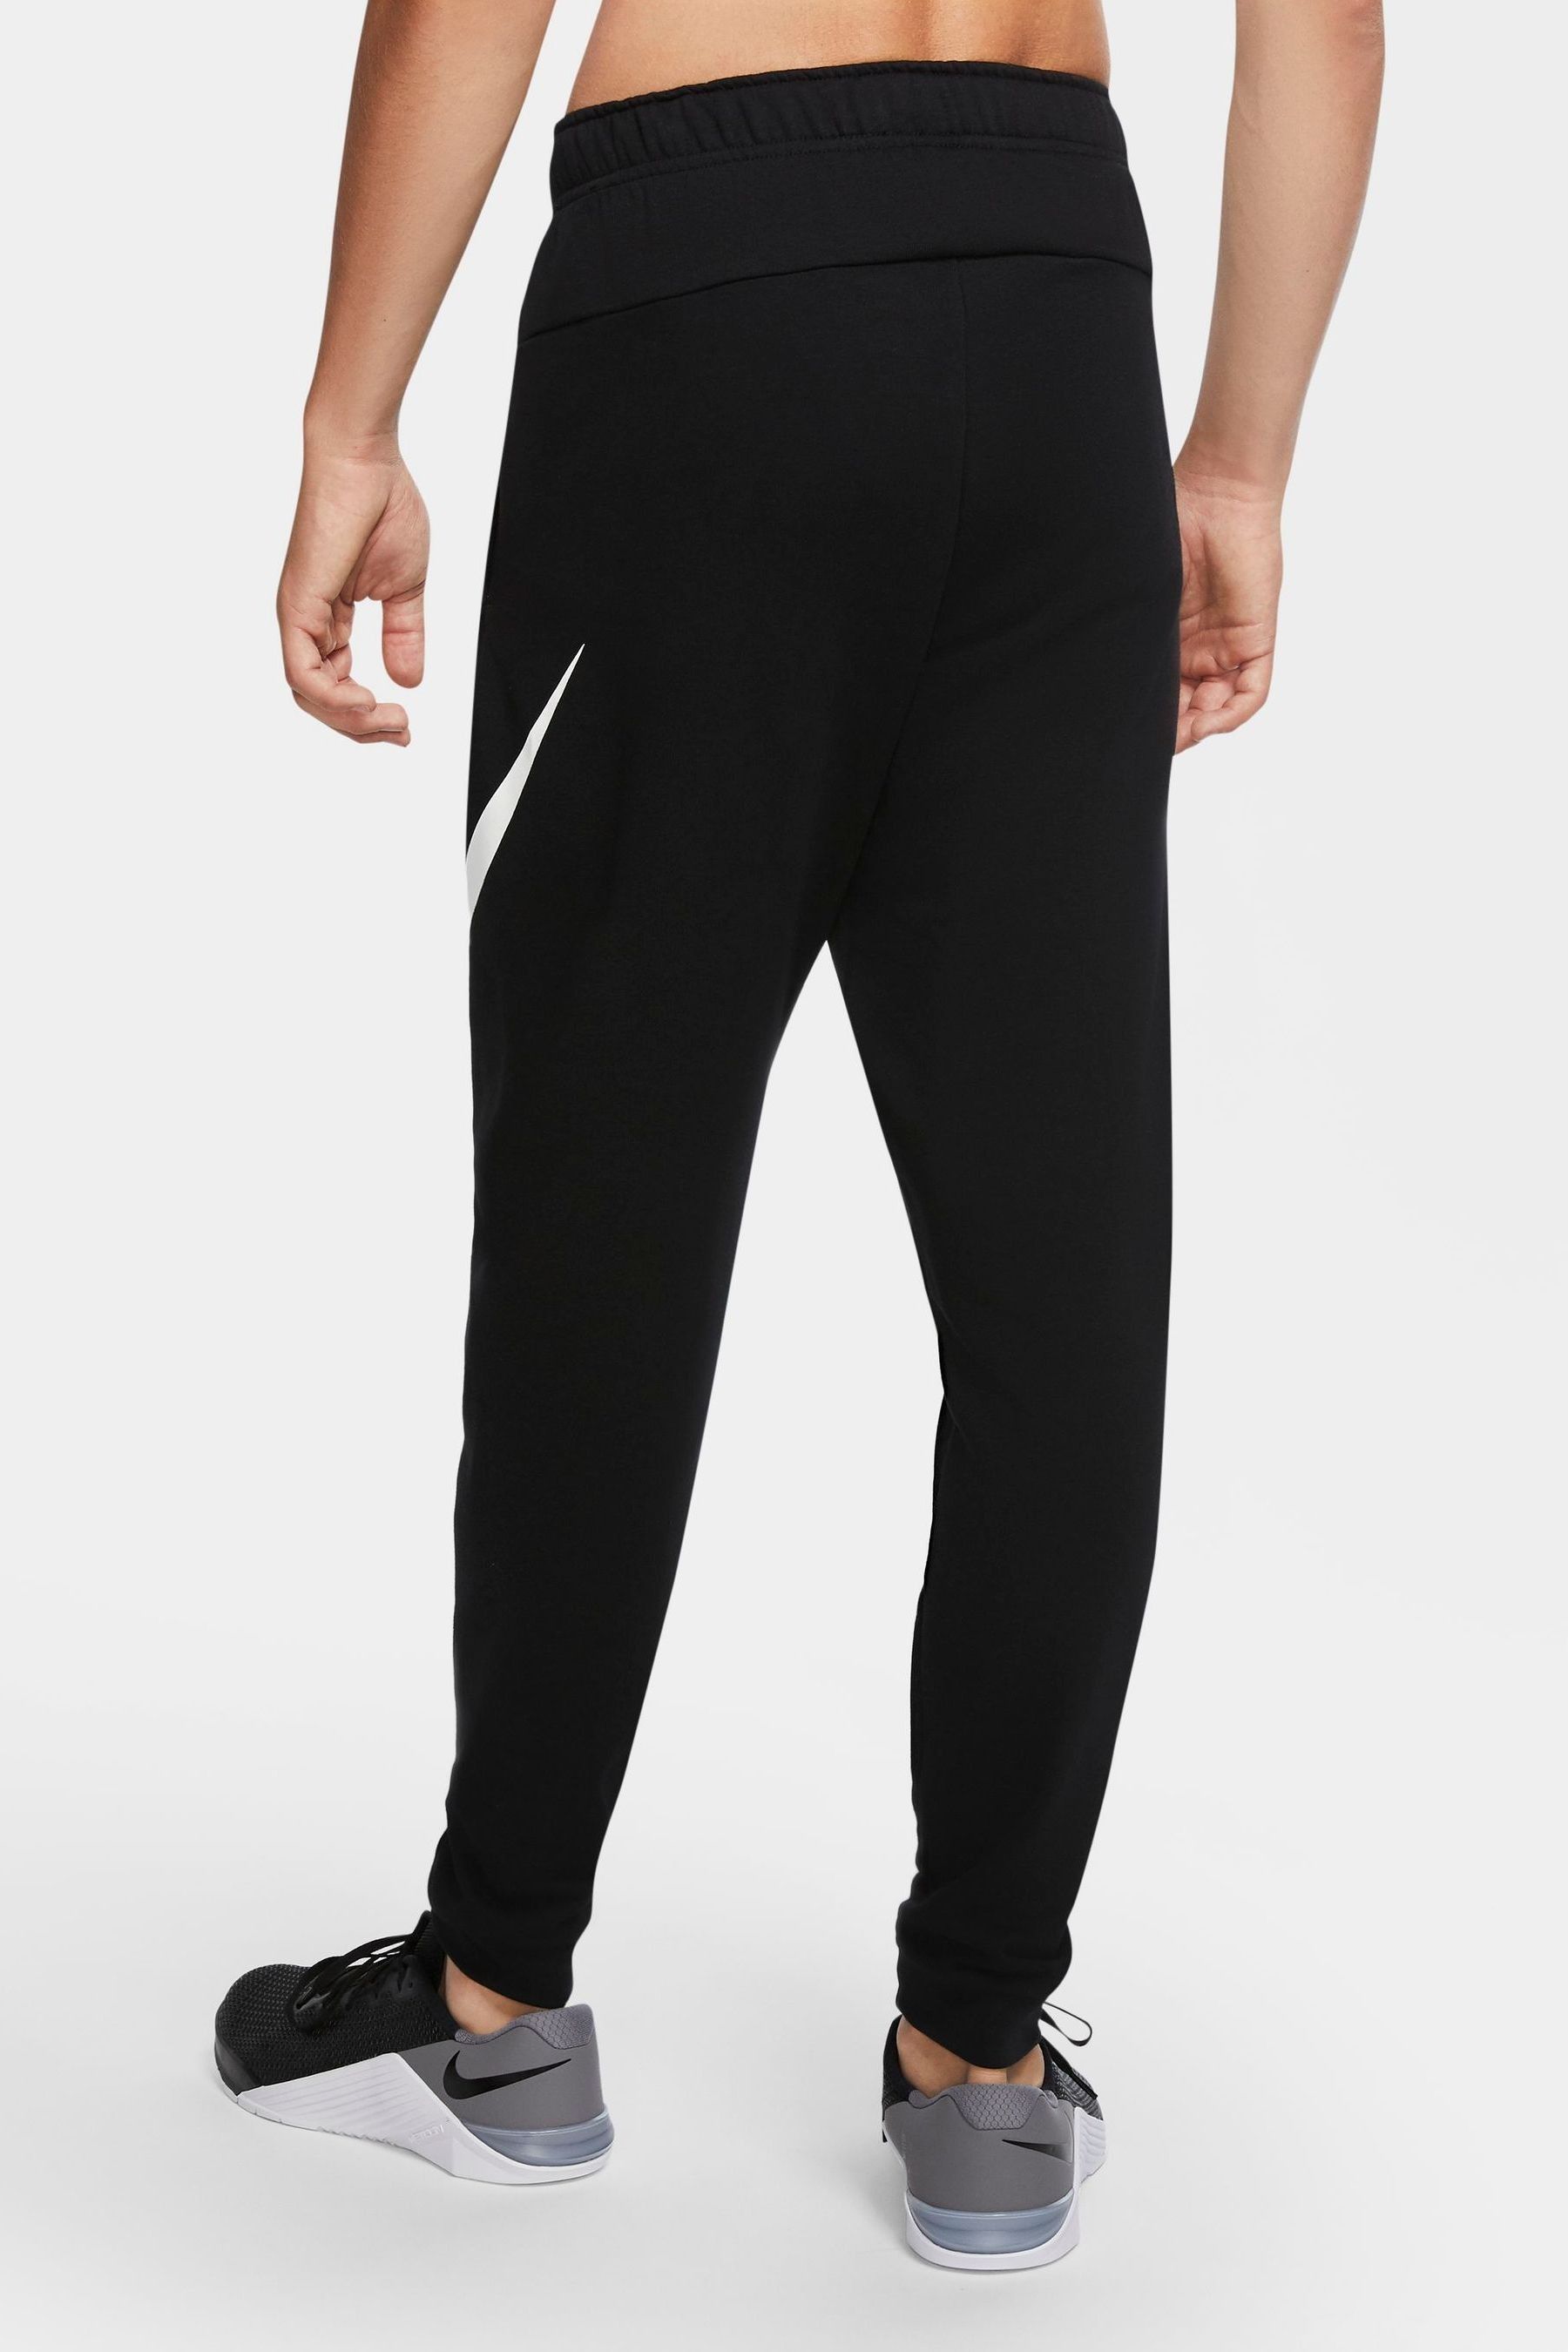 Buy Nike Black Dri-FIT Tapered Training Joggers from the Next UK online ...